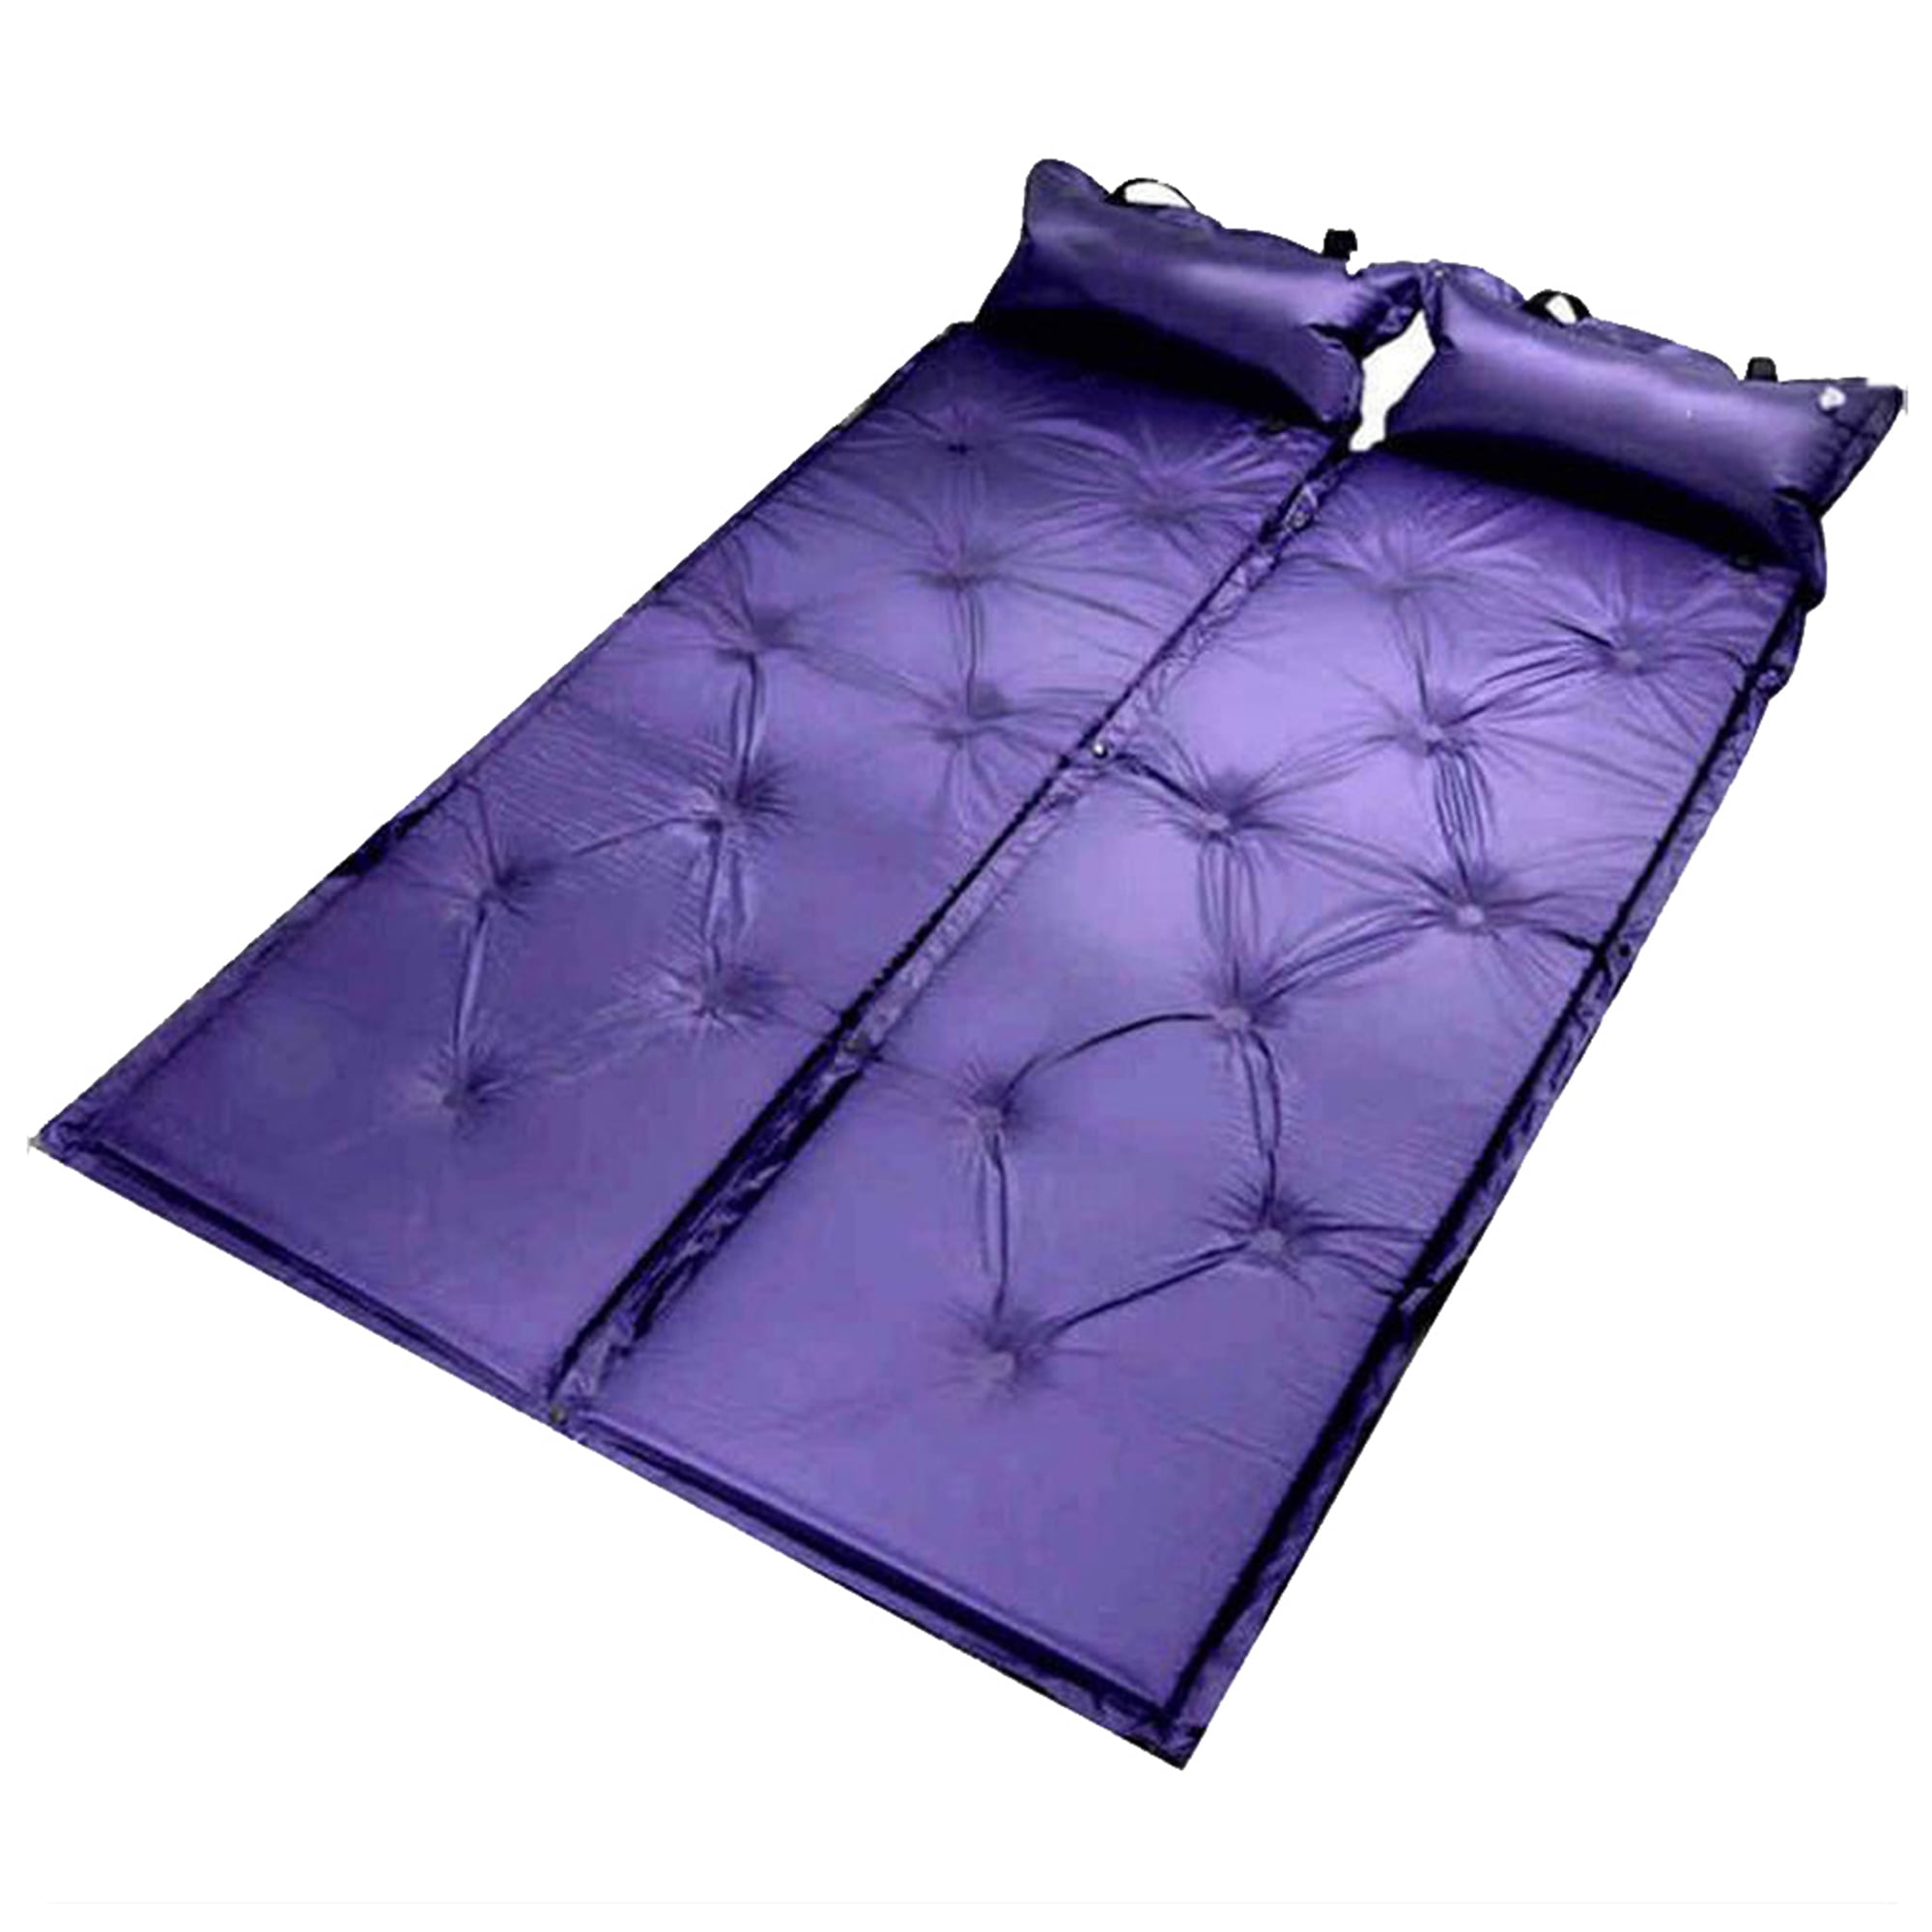 Portable Roll-Up Sleeping Pad and Floor Guest Bed /52 Single 7.5 lbs/Double 13.6 lbs Delivered within 4-5 working days Single 4 Inches Thick PU Foam QOMOTOP Single/Double Self-Inflating Camping Mattress Double 80 × 28